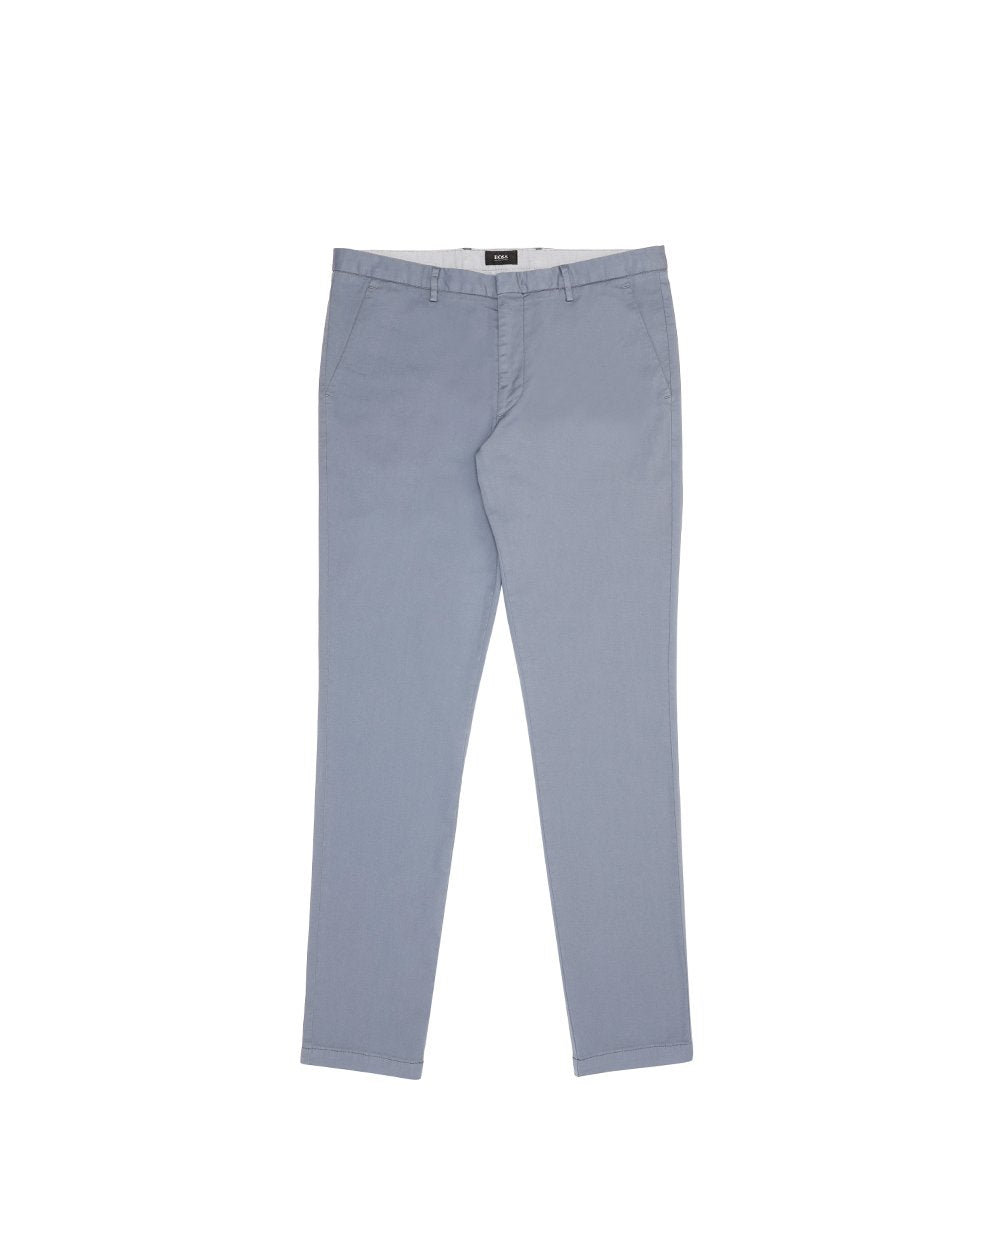 Cotton Pants - ISSI Outlet